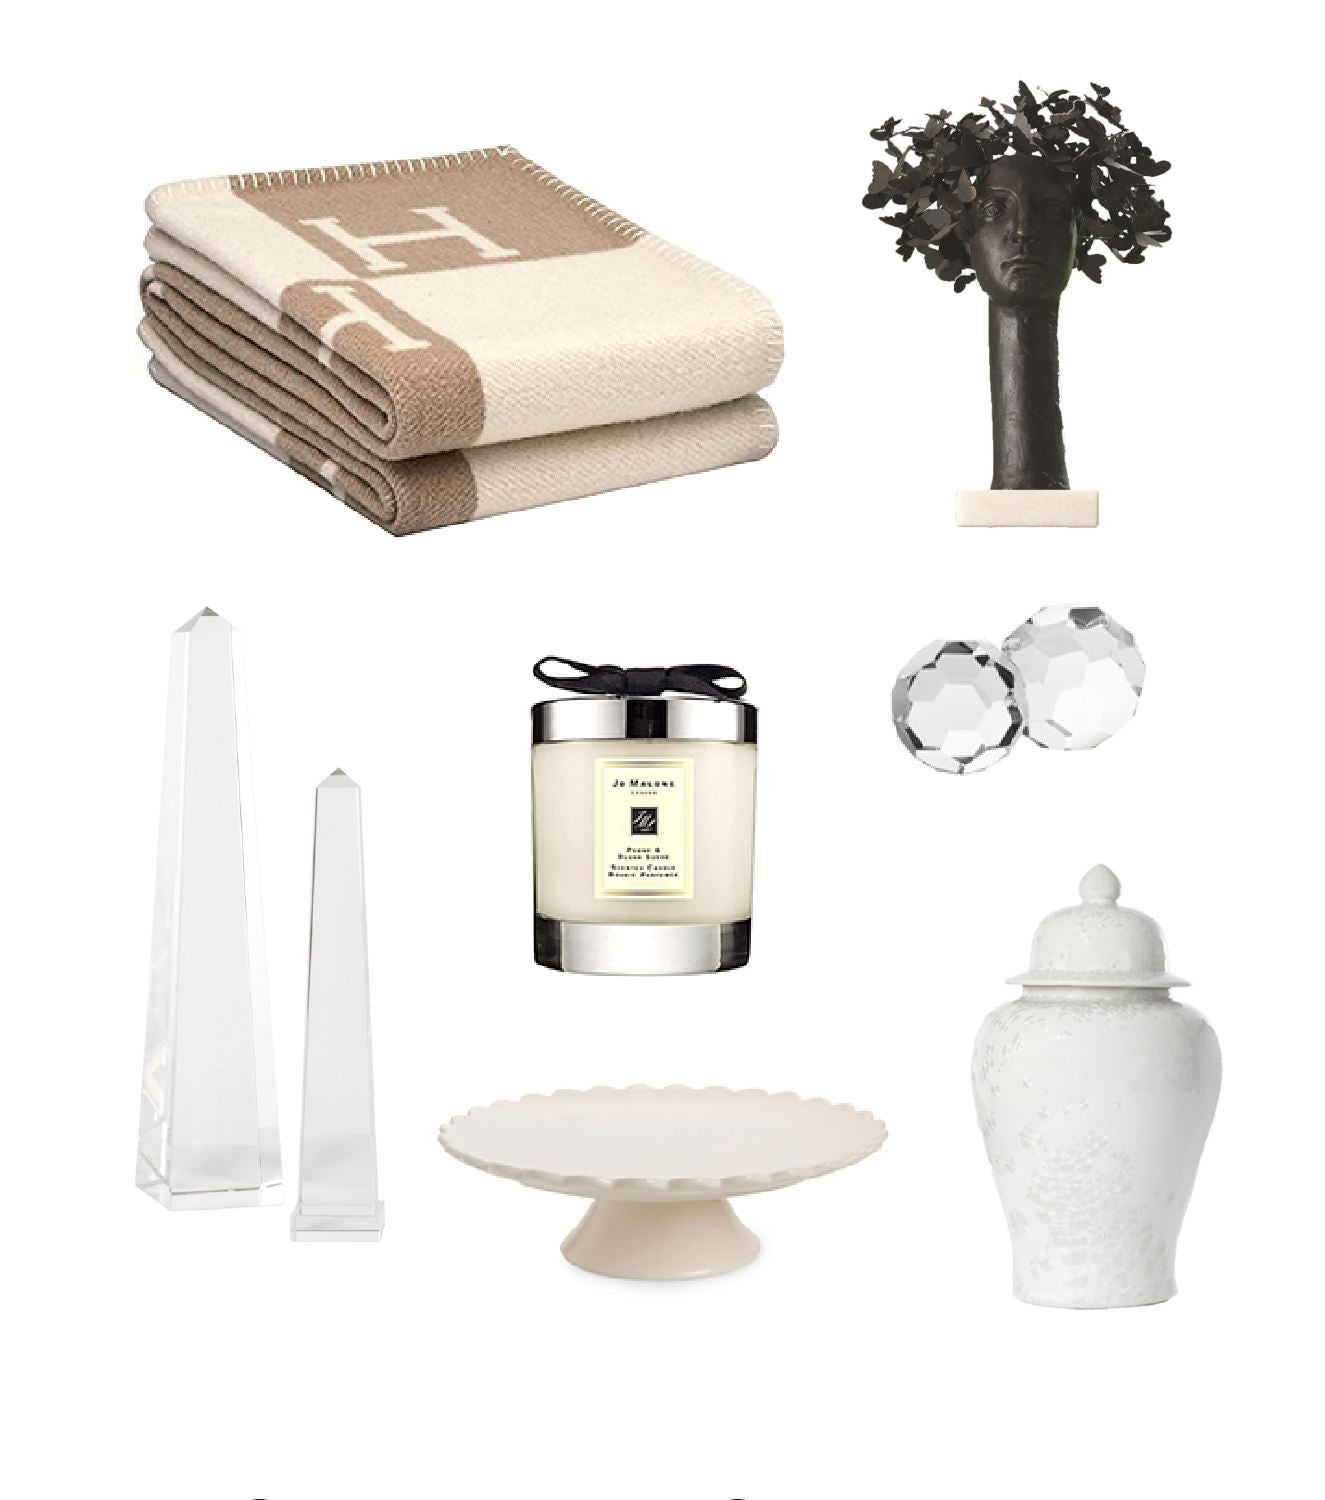 Vases, Stems, Scents, and Coffee Table Books to Refresh Your Home...